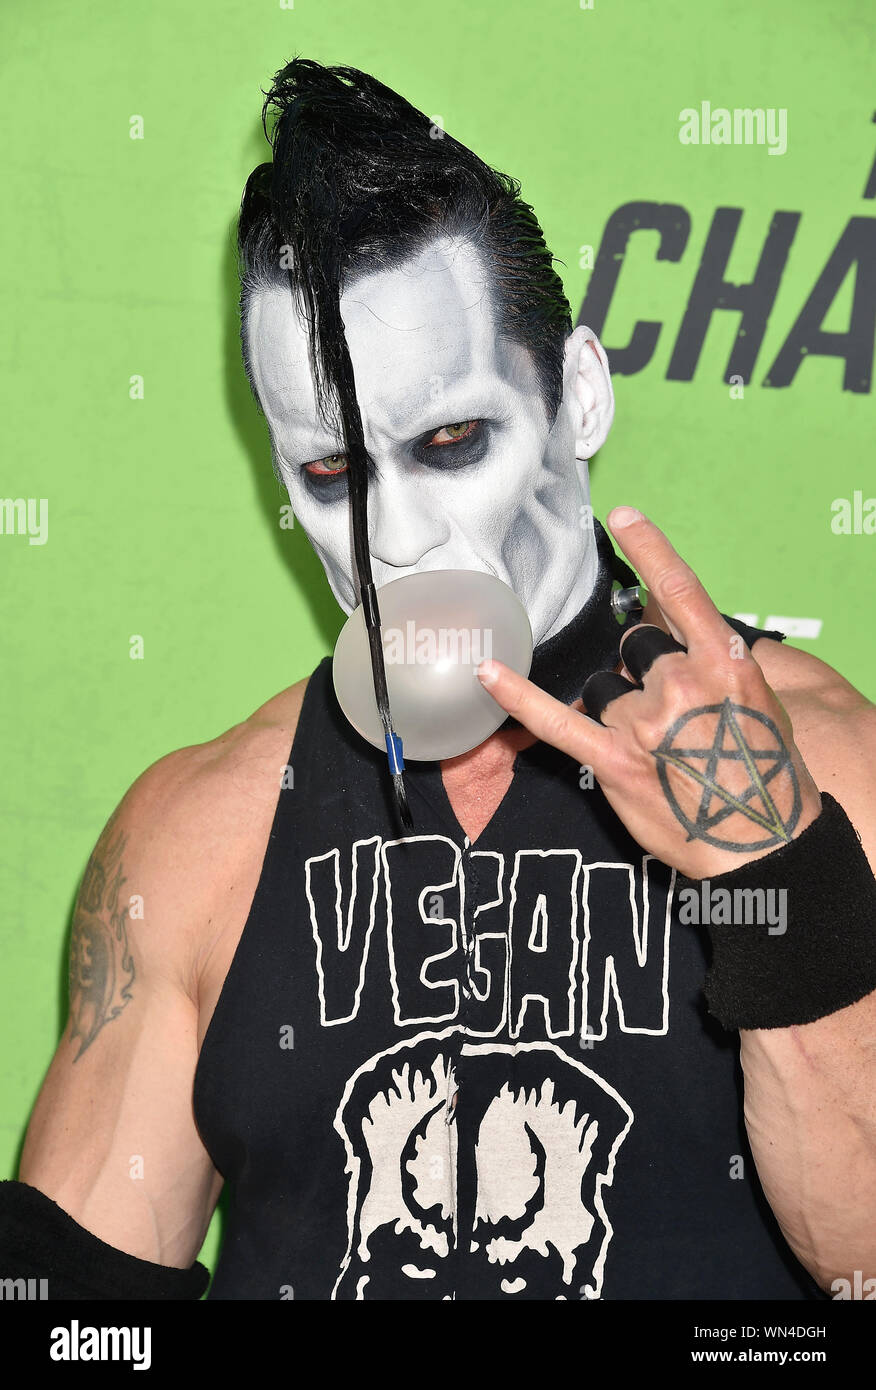 HOLLYWOOD, CA - SEPTEMBER 04: Doyle Wolfgang von Frankenstein attends the LA Premiere Of 'The Game Changers' at ArcLight Hollywood on September 04, 2019 in Hollywood, California. Stock Photo